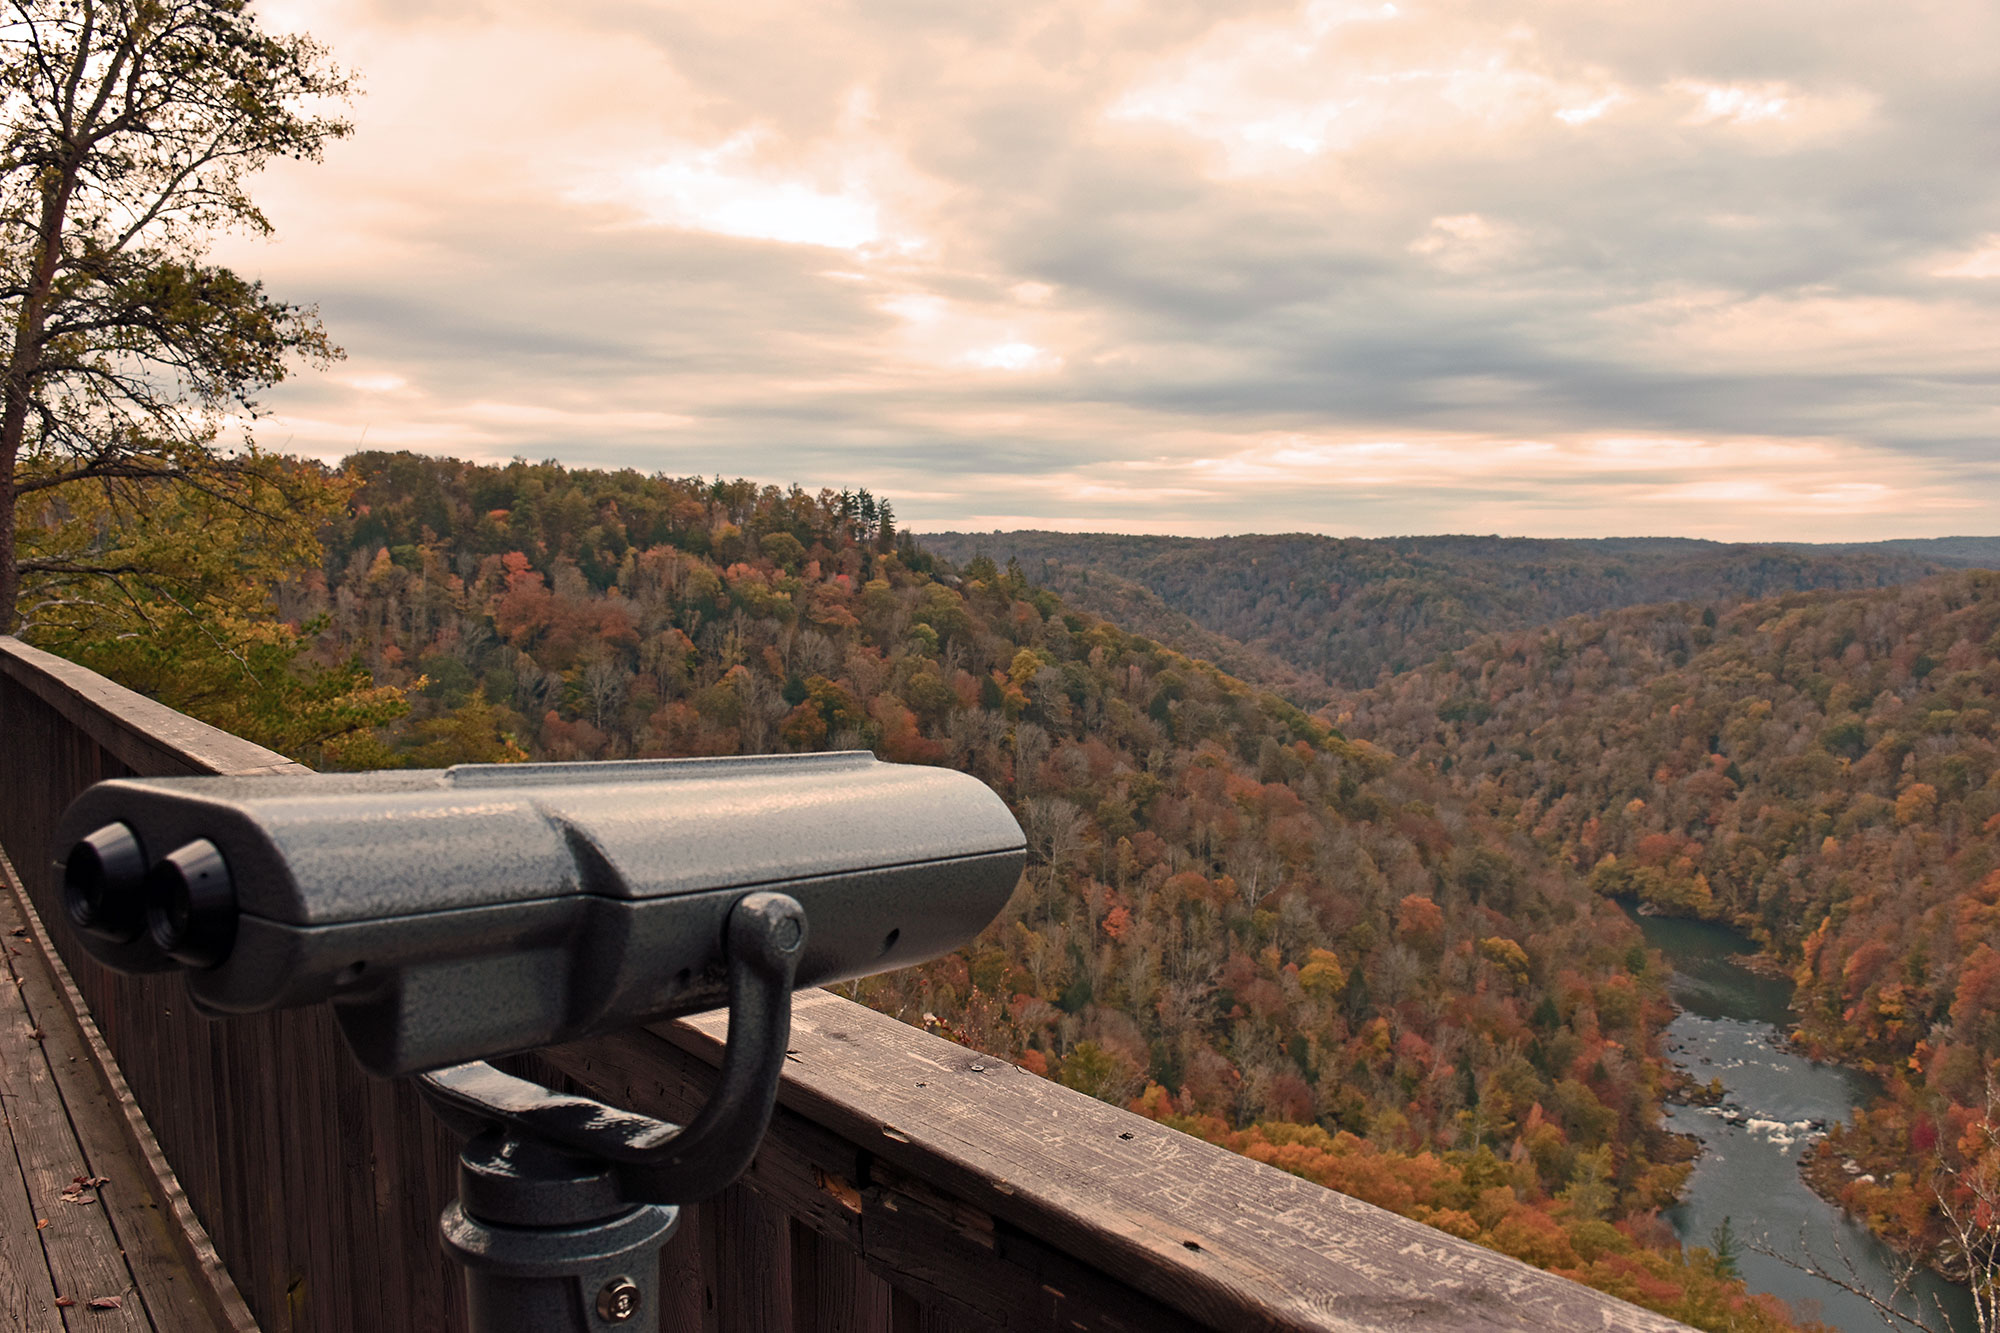 Viewfinder points over the overlook towards the river and multi-colored forests below